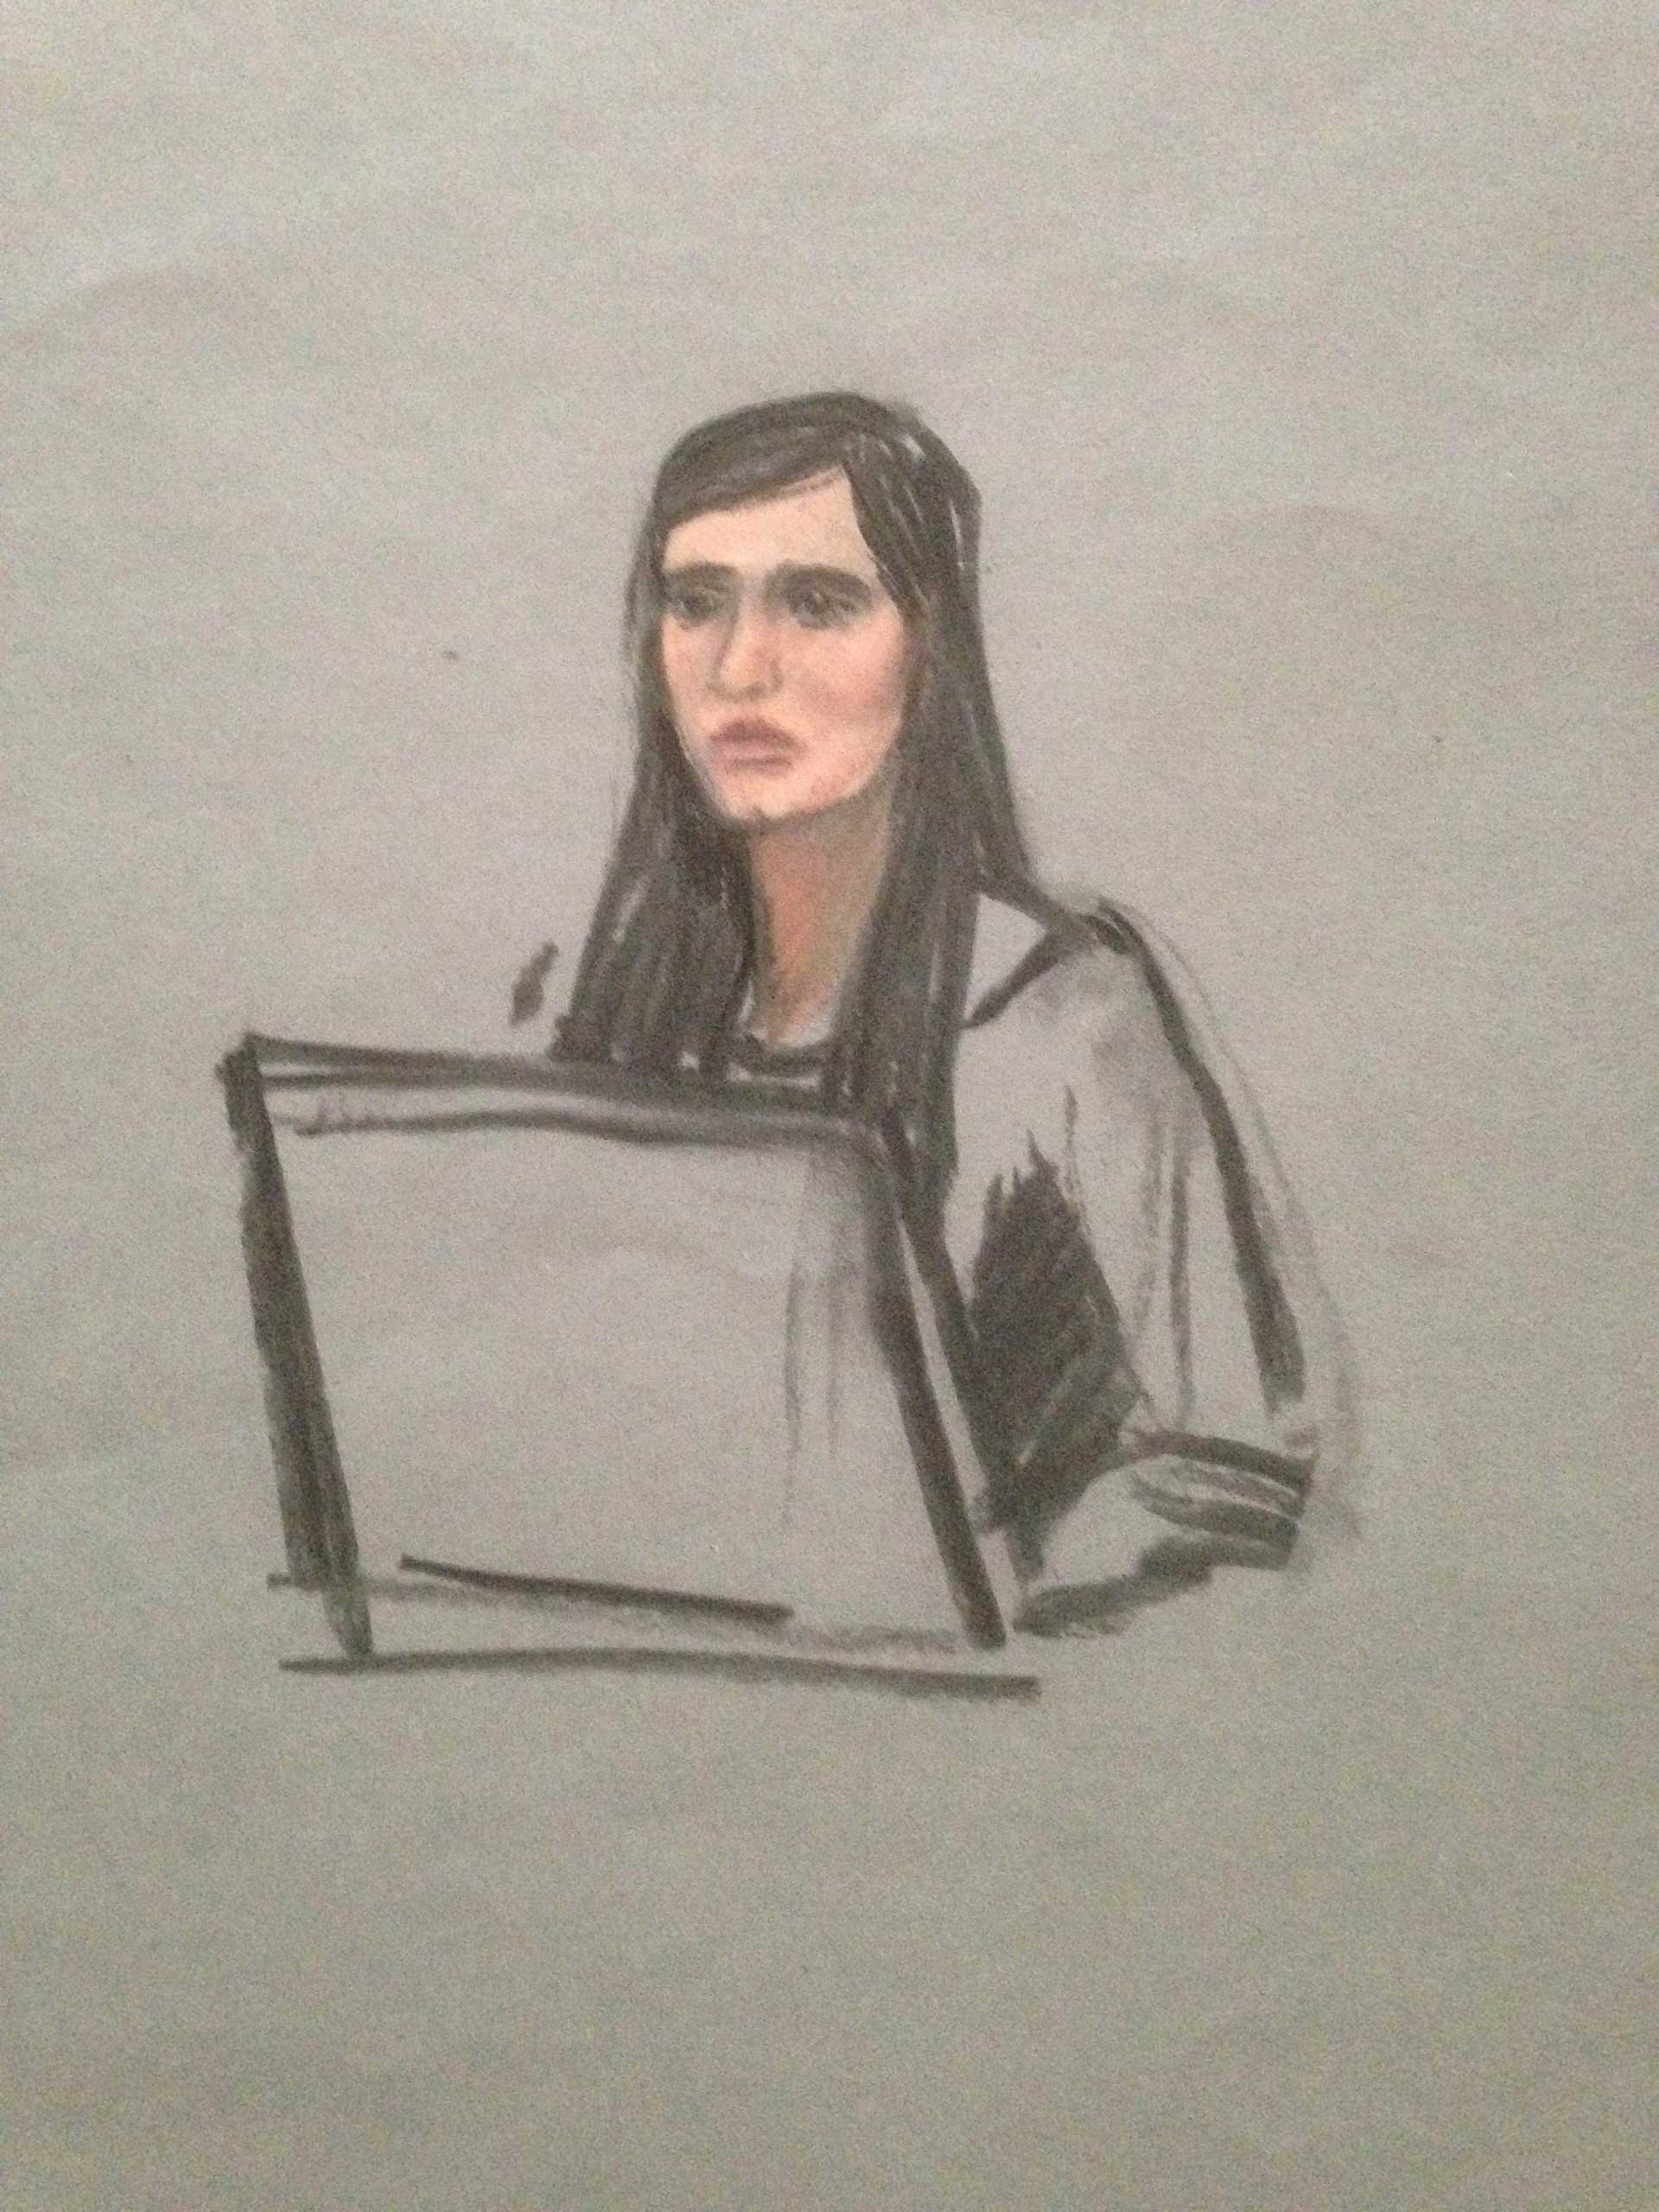 A courtroom sketch shows Boston Marathon bombing survivor Sydney Corcoran testifying in the trial of accused bomber Dzhokhar Tsarnaev at the federal courthouse in Boston, Mass., March 4, 2015. (Jane Flavell Collins—Reuters)